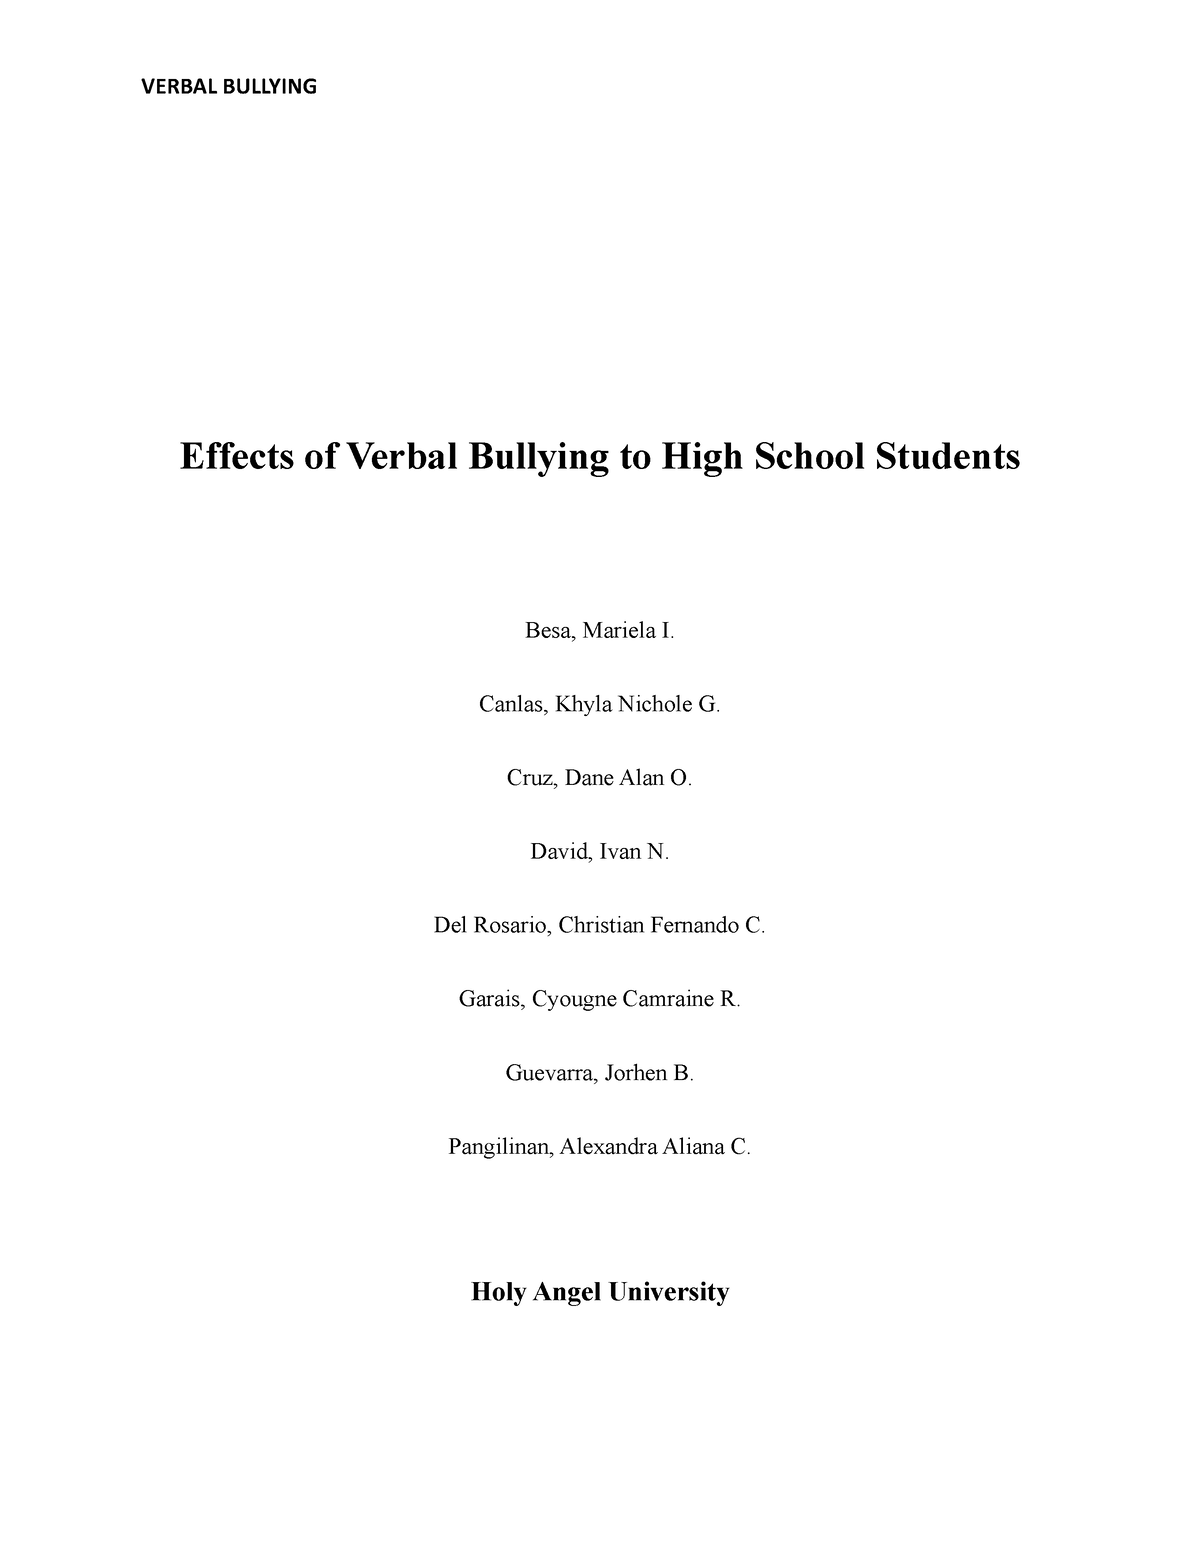 research paper about verbal bullying